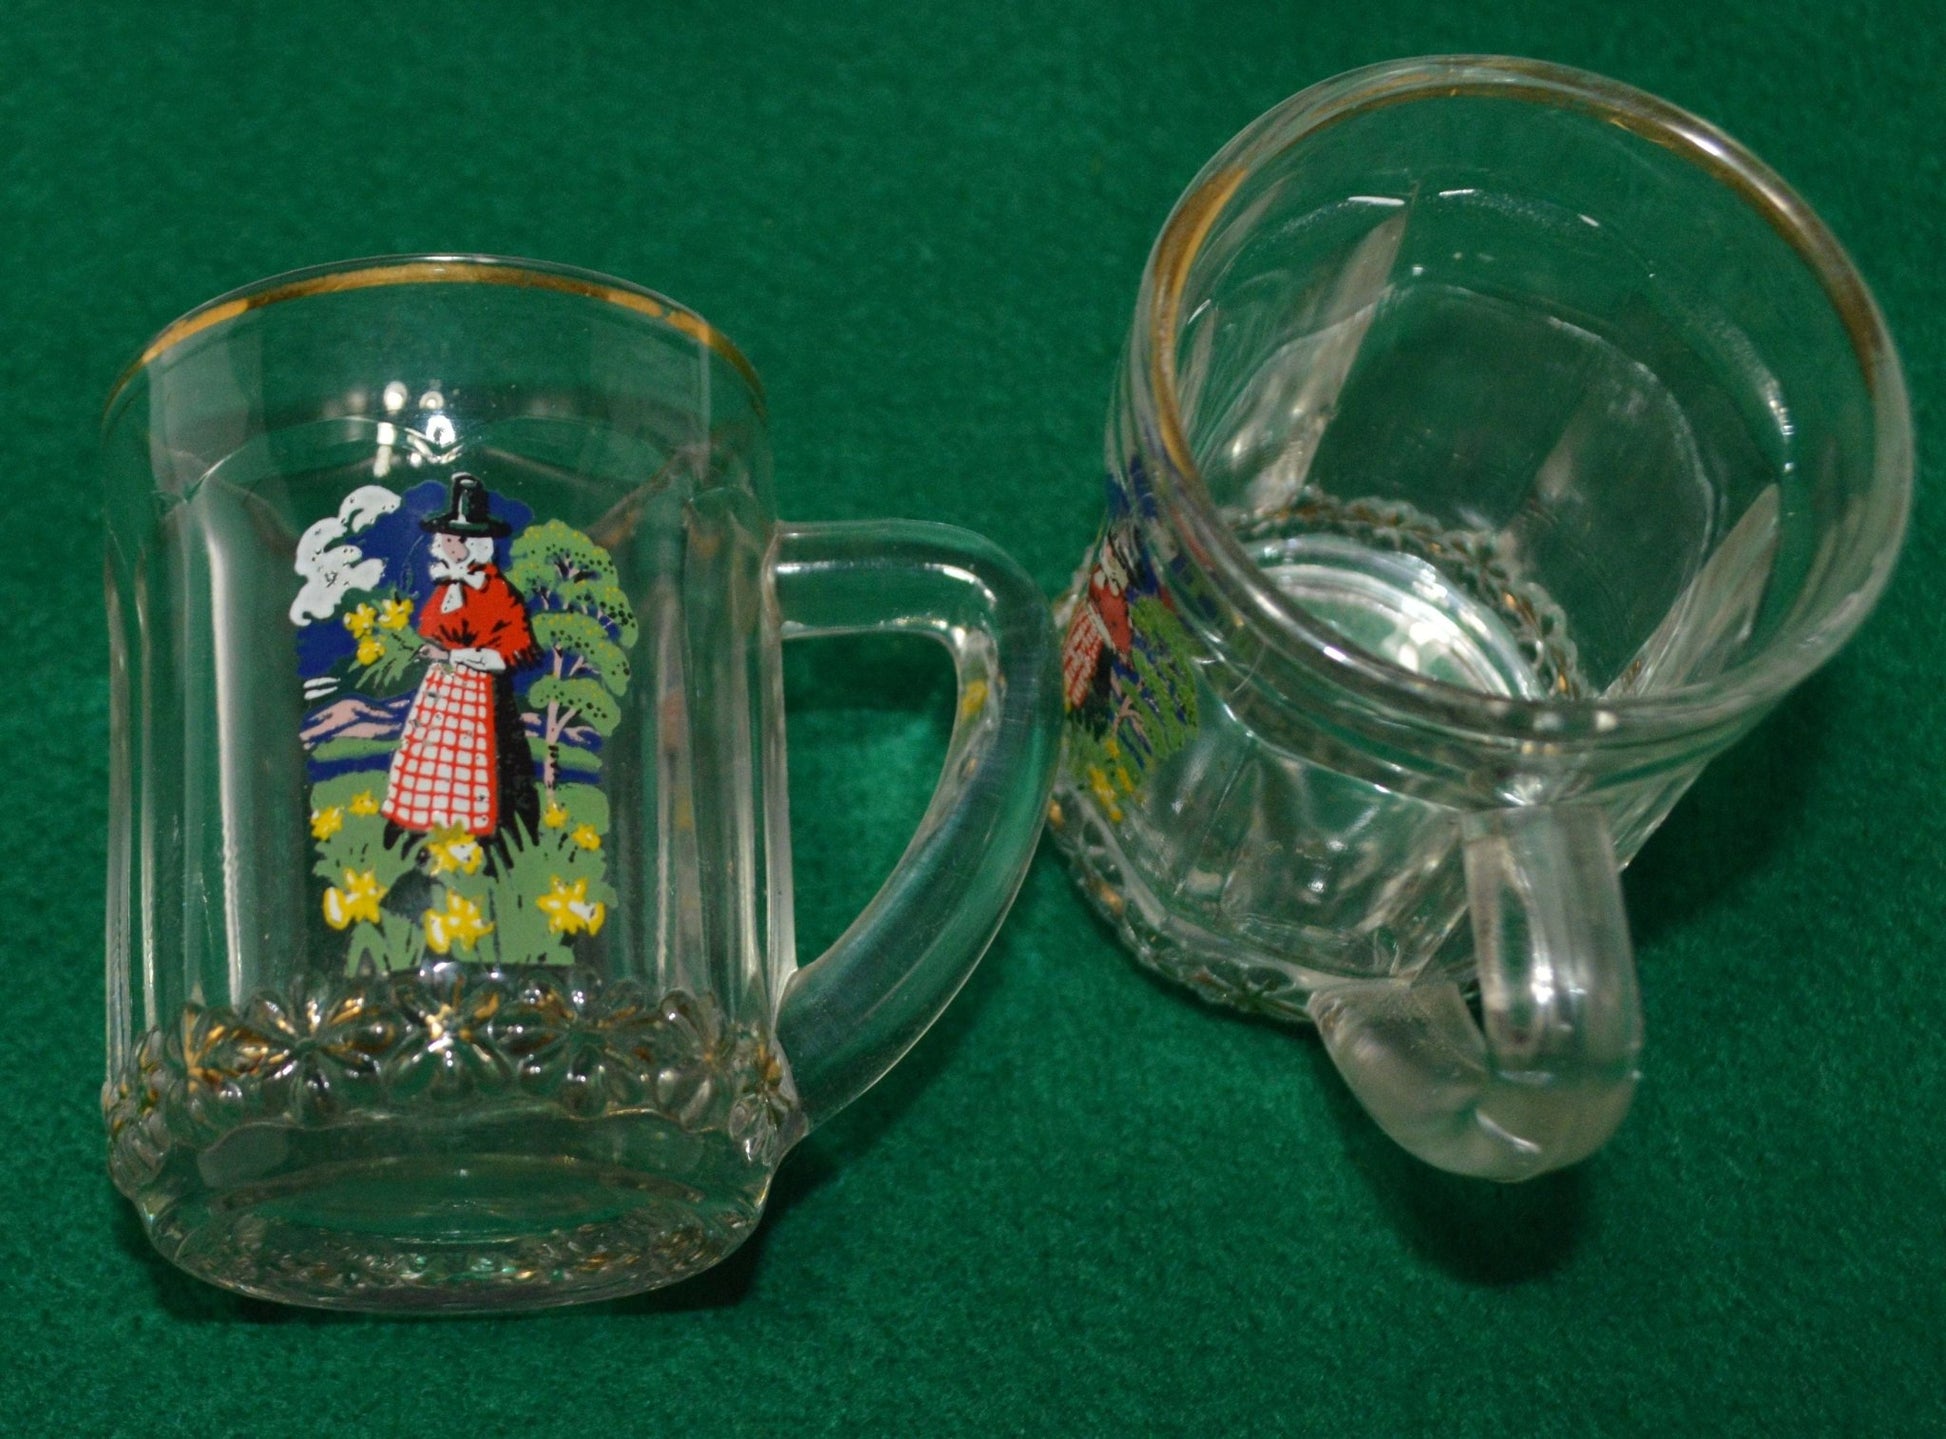 TWO MINIATURE GLASS TANKARDS DEPICTING THE TRADITIONAL COSTUME OF A WELSH LADY(PREVIOUSLY OWNED) GOOD CONDITION - TMD167207